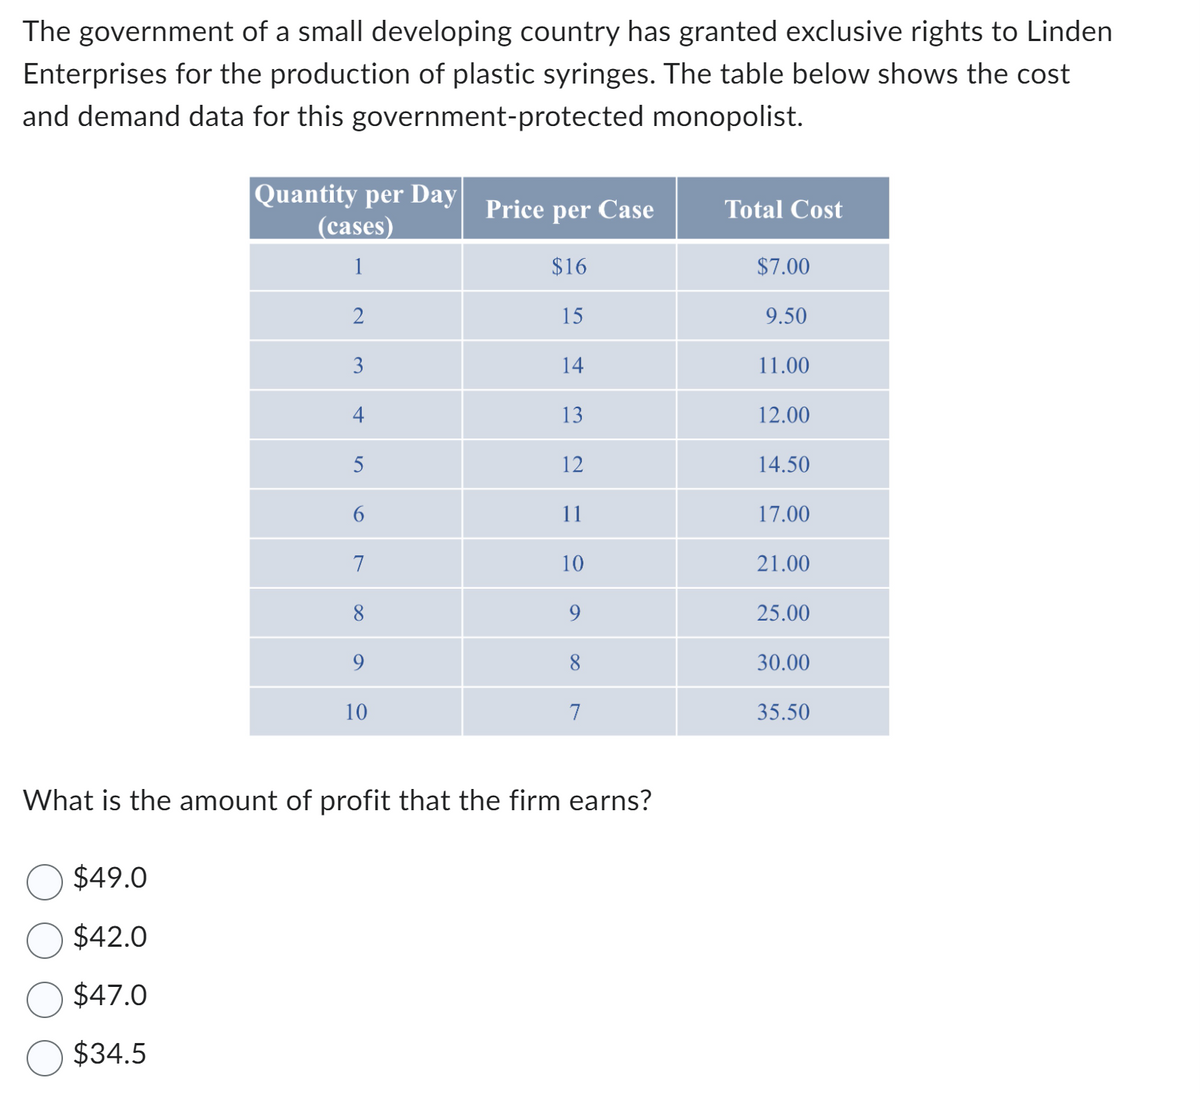 The government of a small developing country has granted exclusive rights to Linden
Enterprises for the production of plastic syringes. The table below shows the cost
and demand data for this government-protected monopolist.
Quantity per Day
(cases)
1
2
3
$49.0
$42.0
$47.0
$34.5
5
6
7
8
10
Price per Case
$16
15
14
13
12
11
10
7
What is the amount of profit that the firm earns?
Total Cost
$7.00
9.50
11.00
12.00
14.50
17.00
21.00
25.00
30.00
35.50